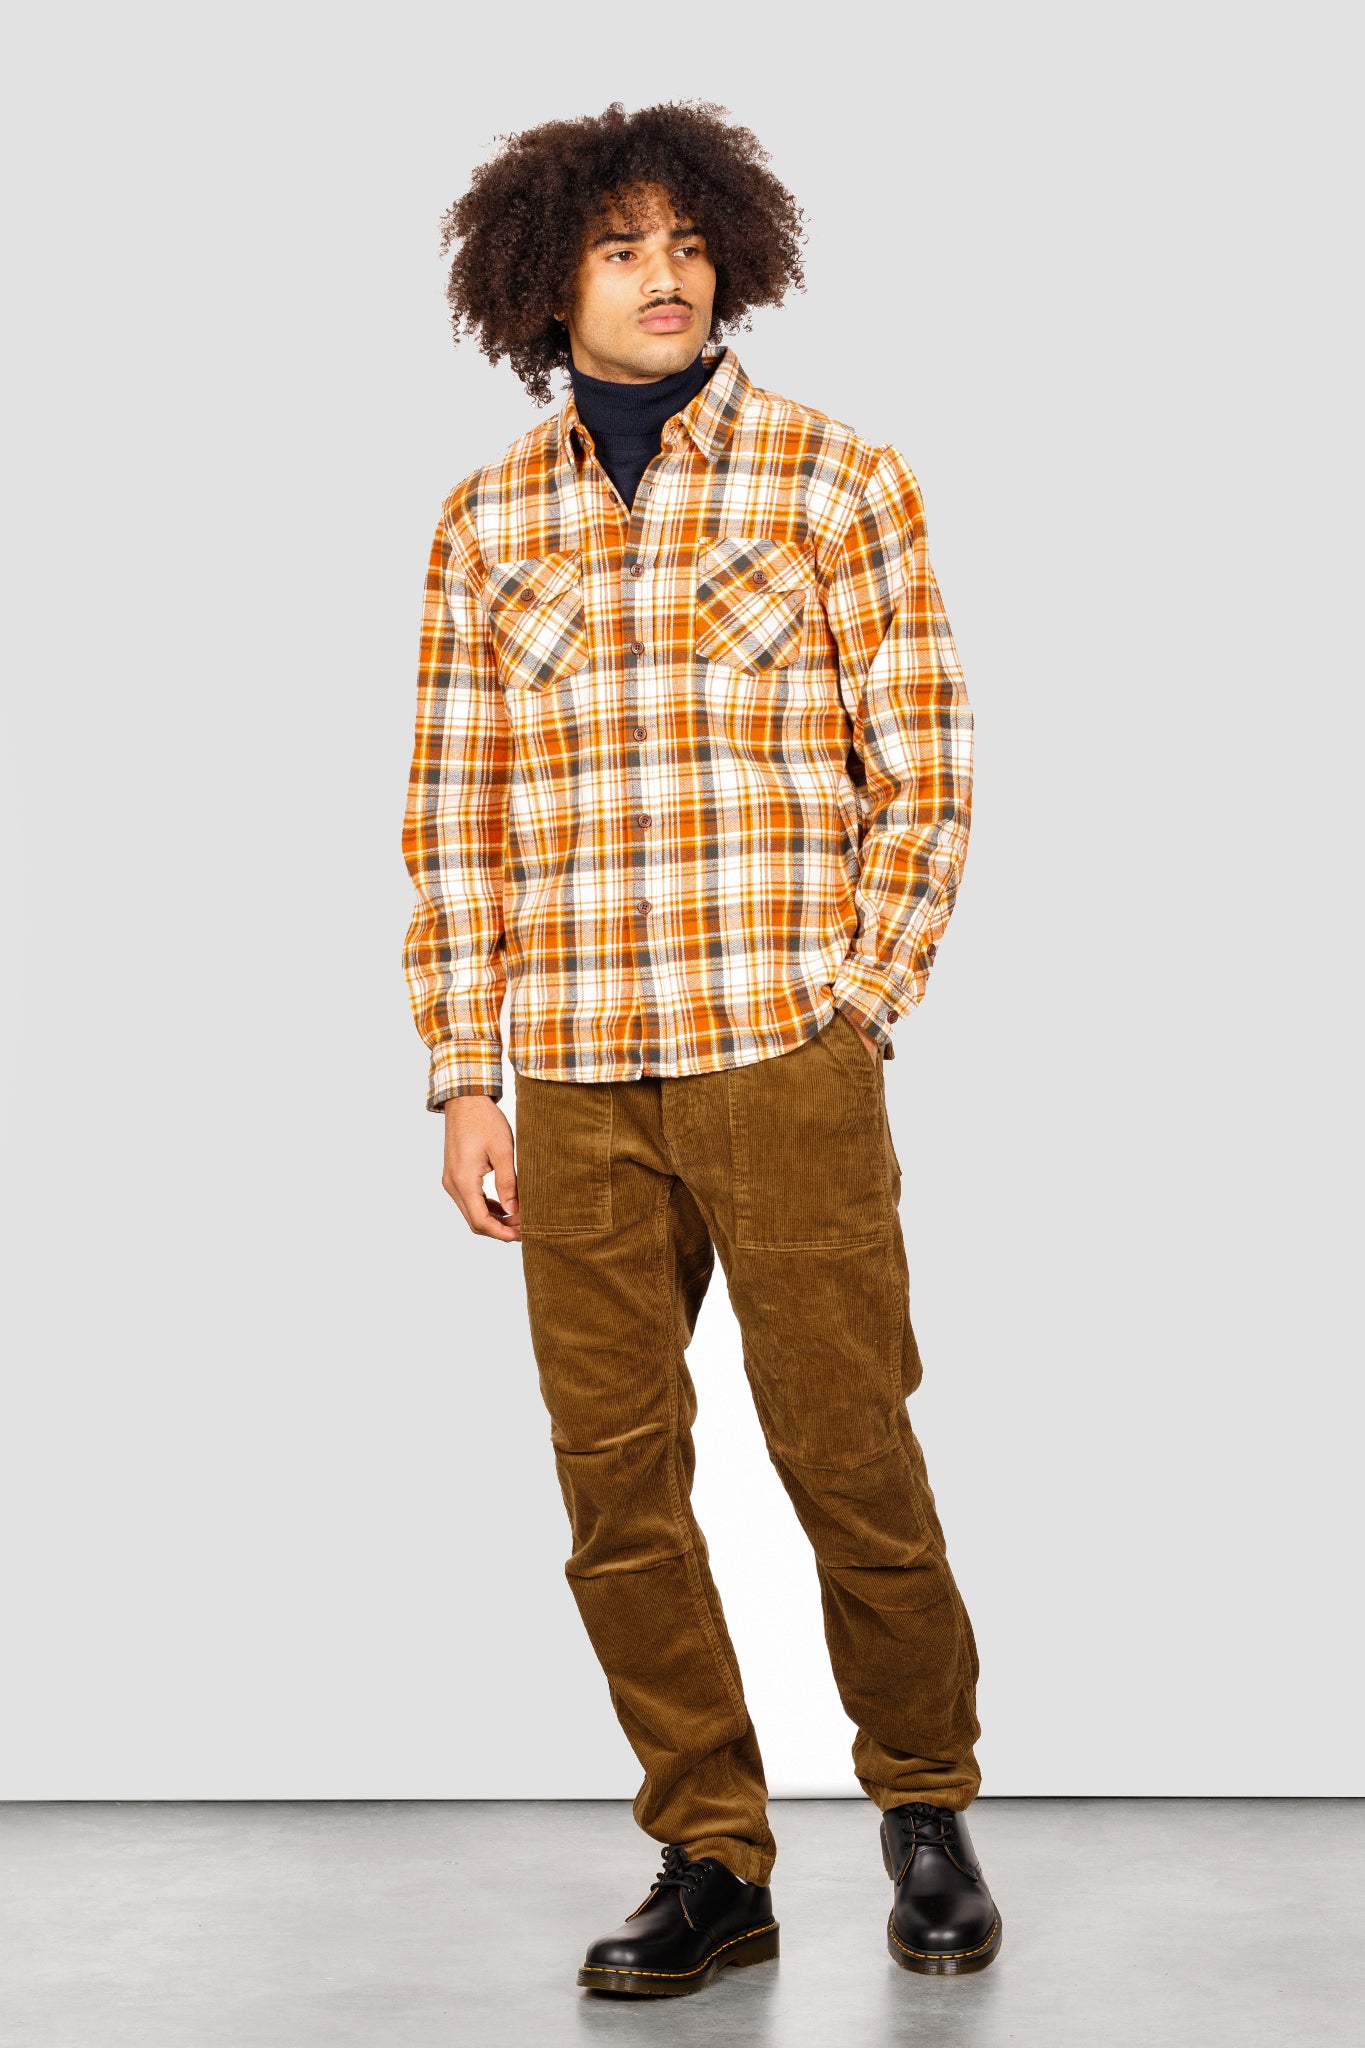 Fred Flannel Shirts Katin   